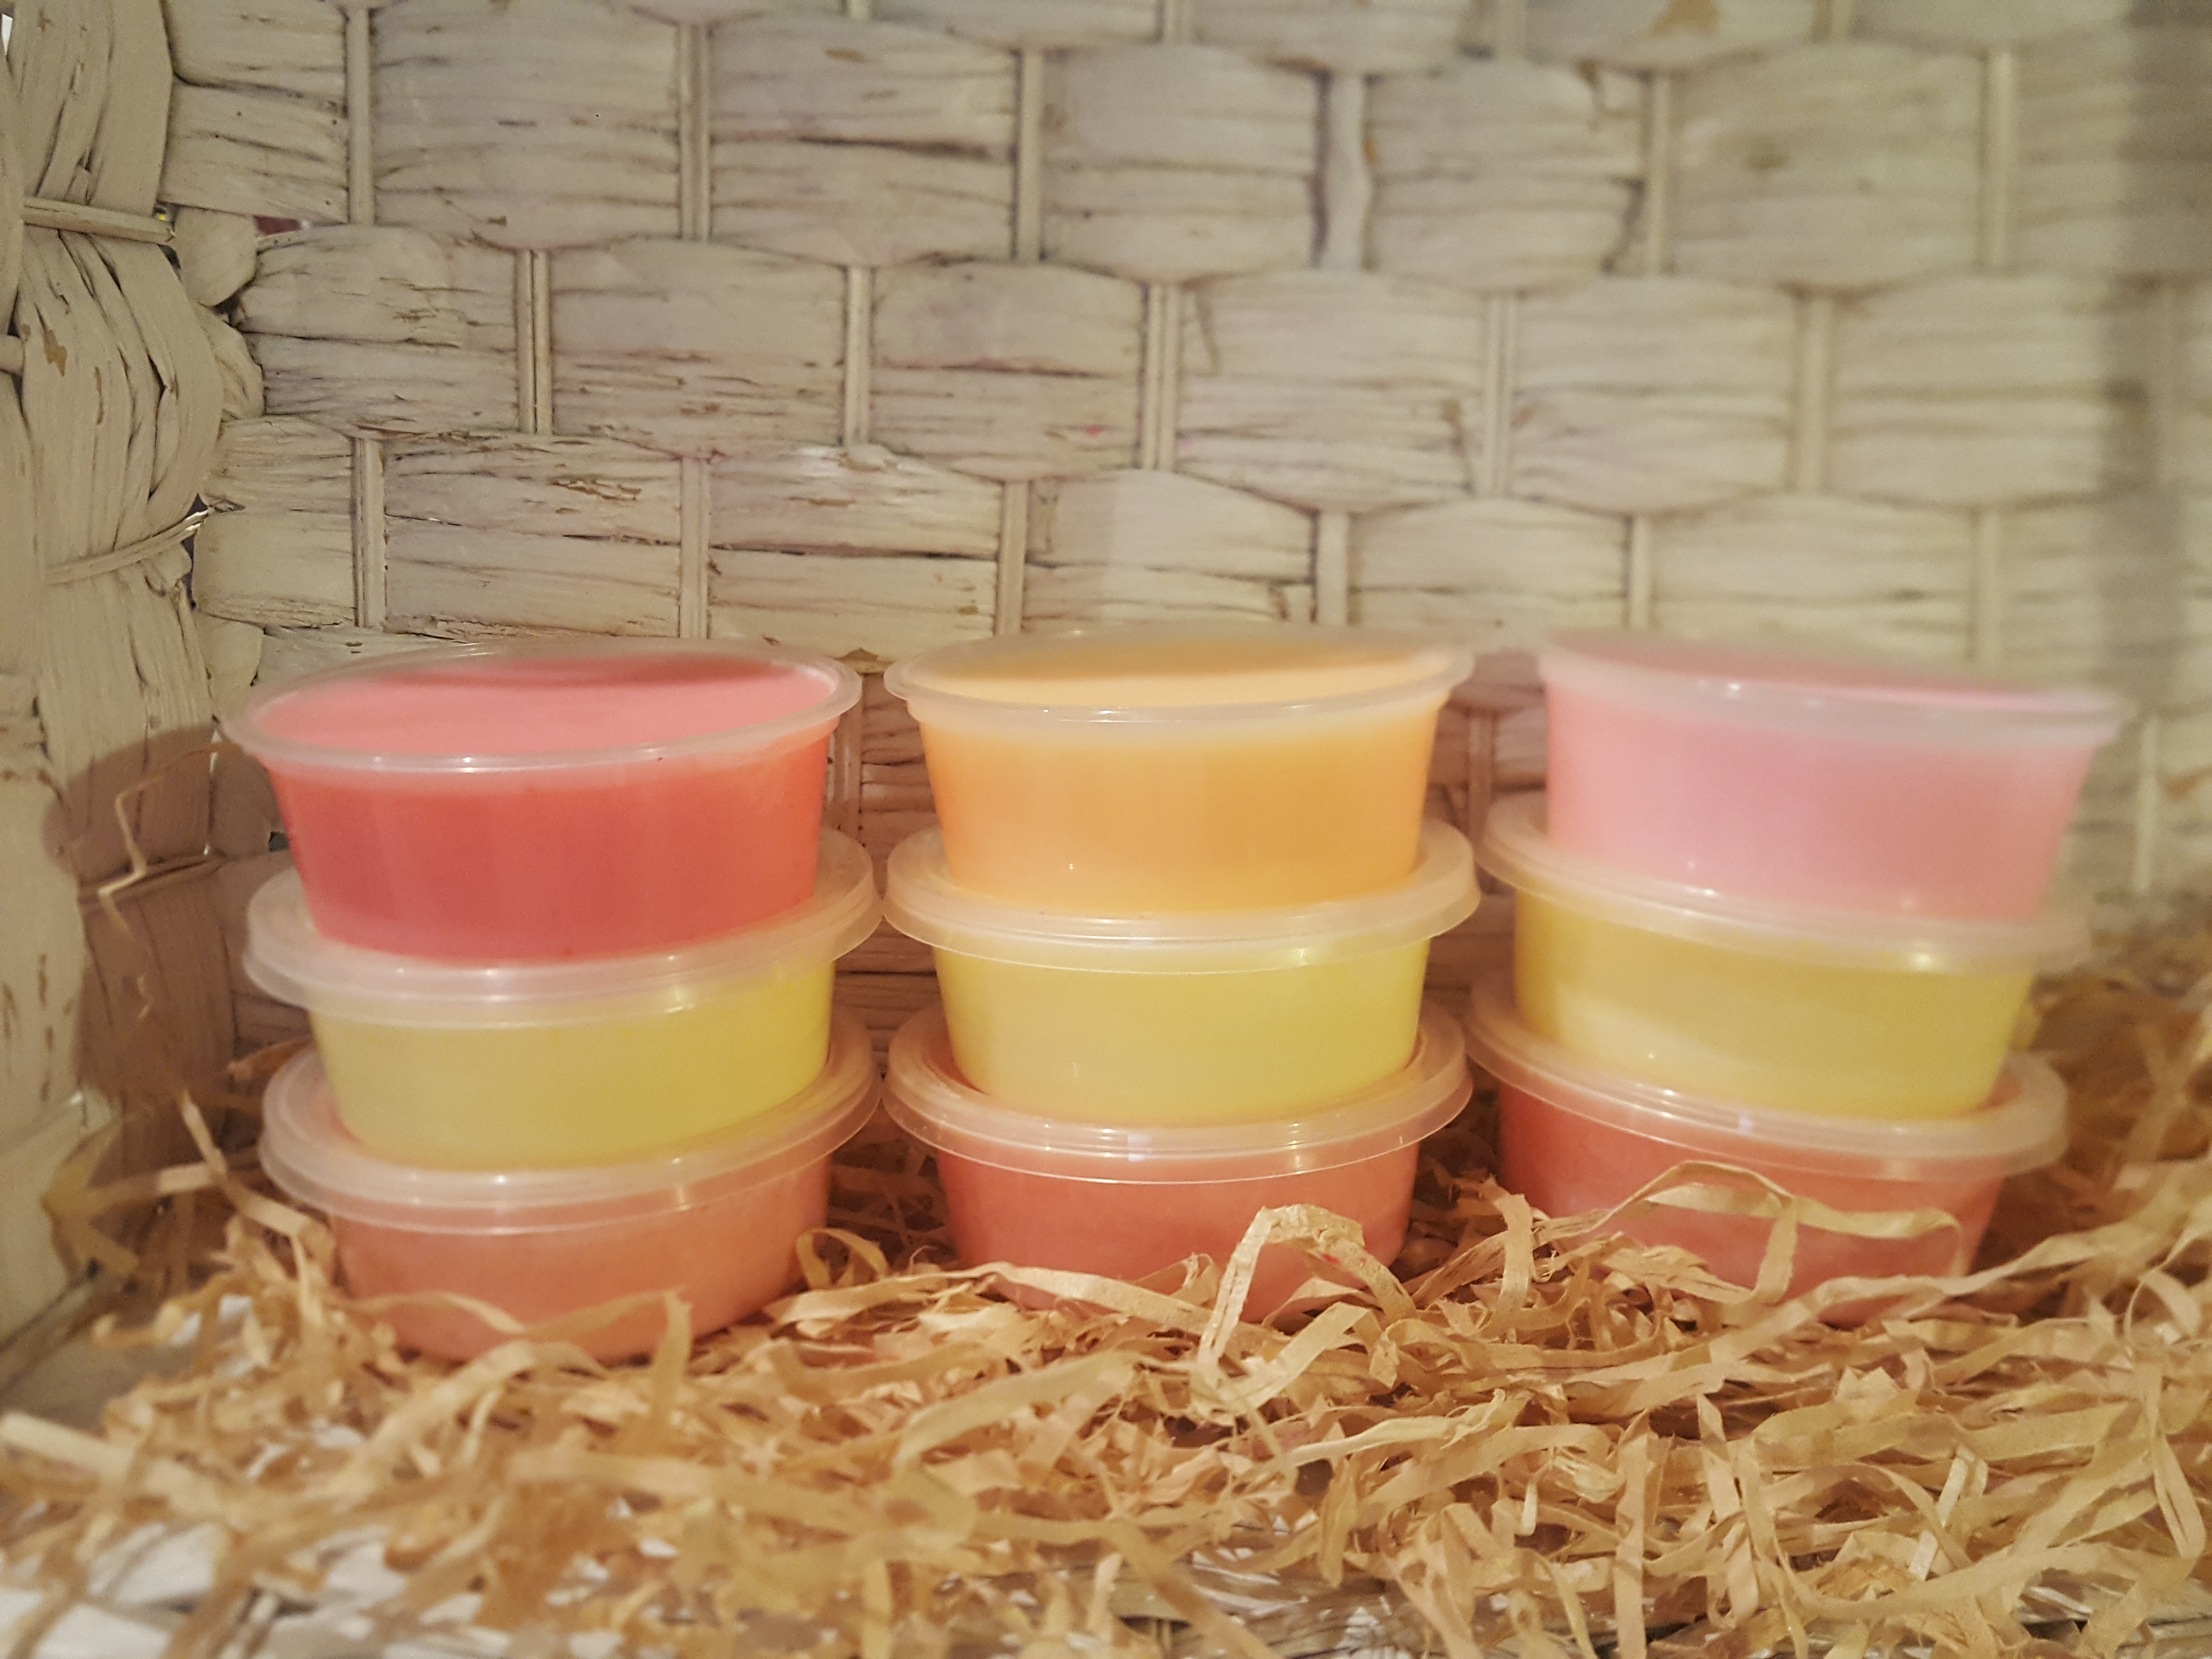 Scoopy Melts Scented 70g Fragrances vary